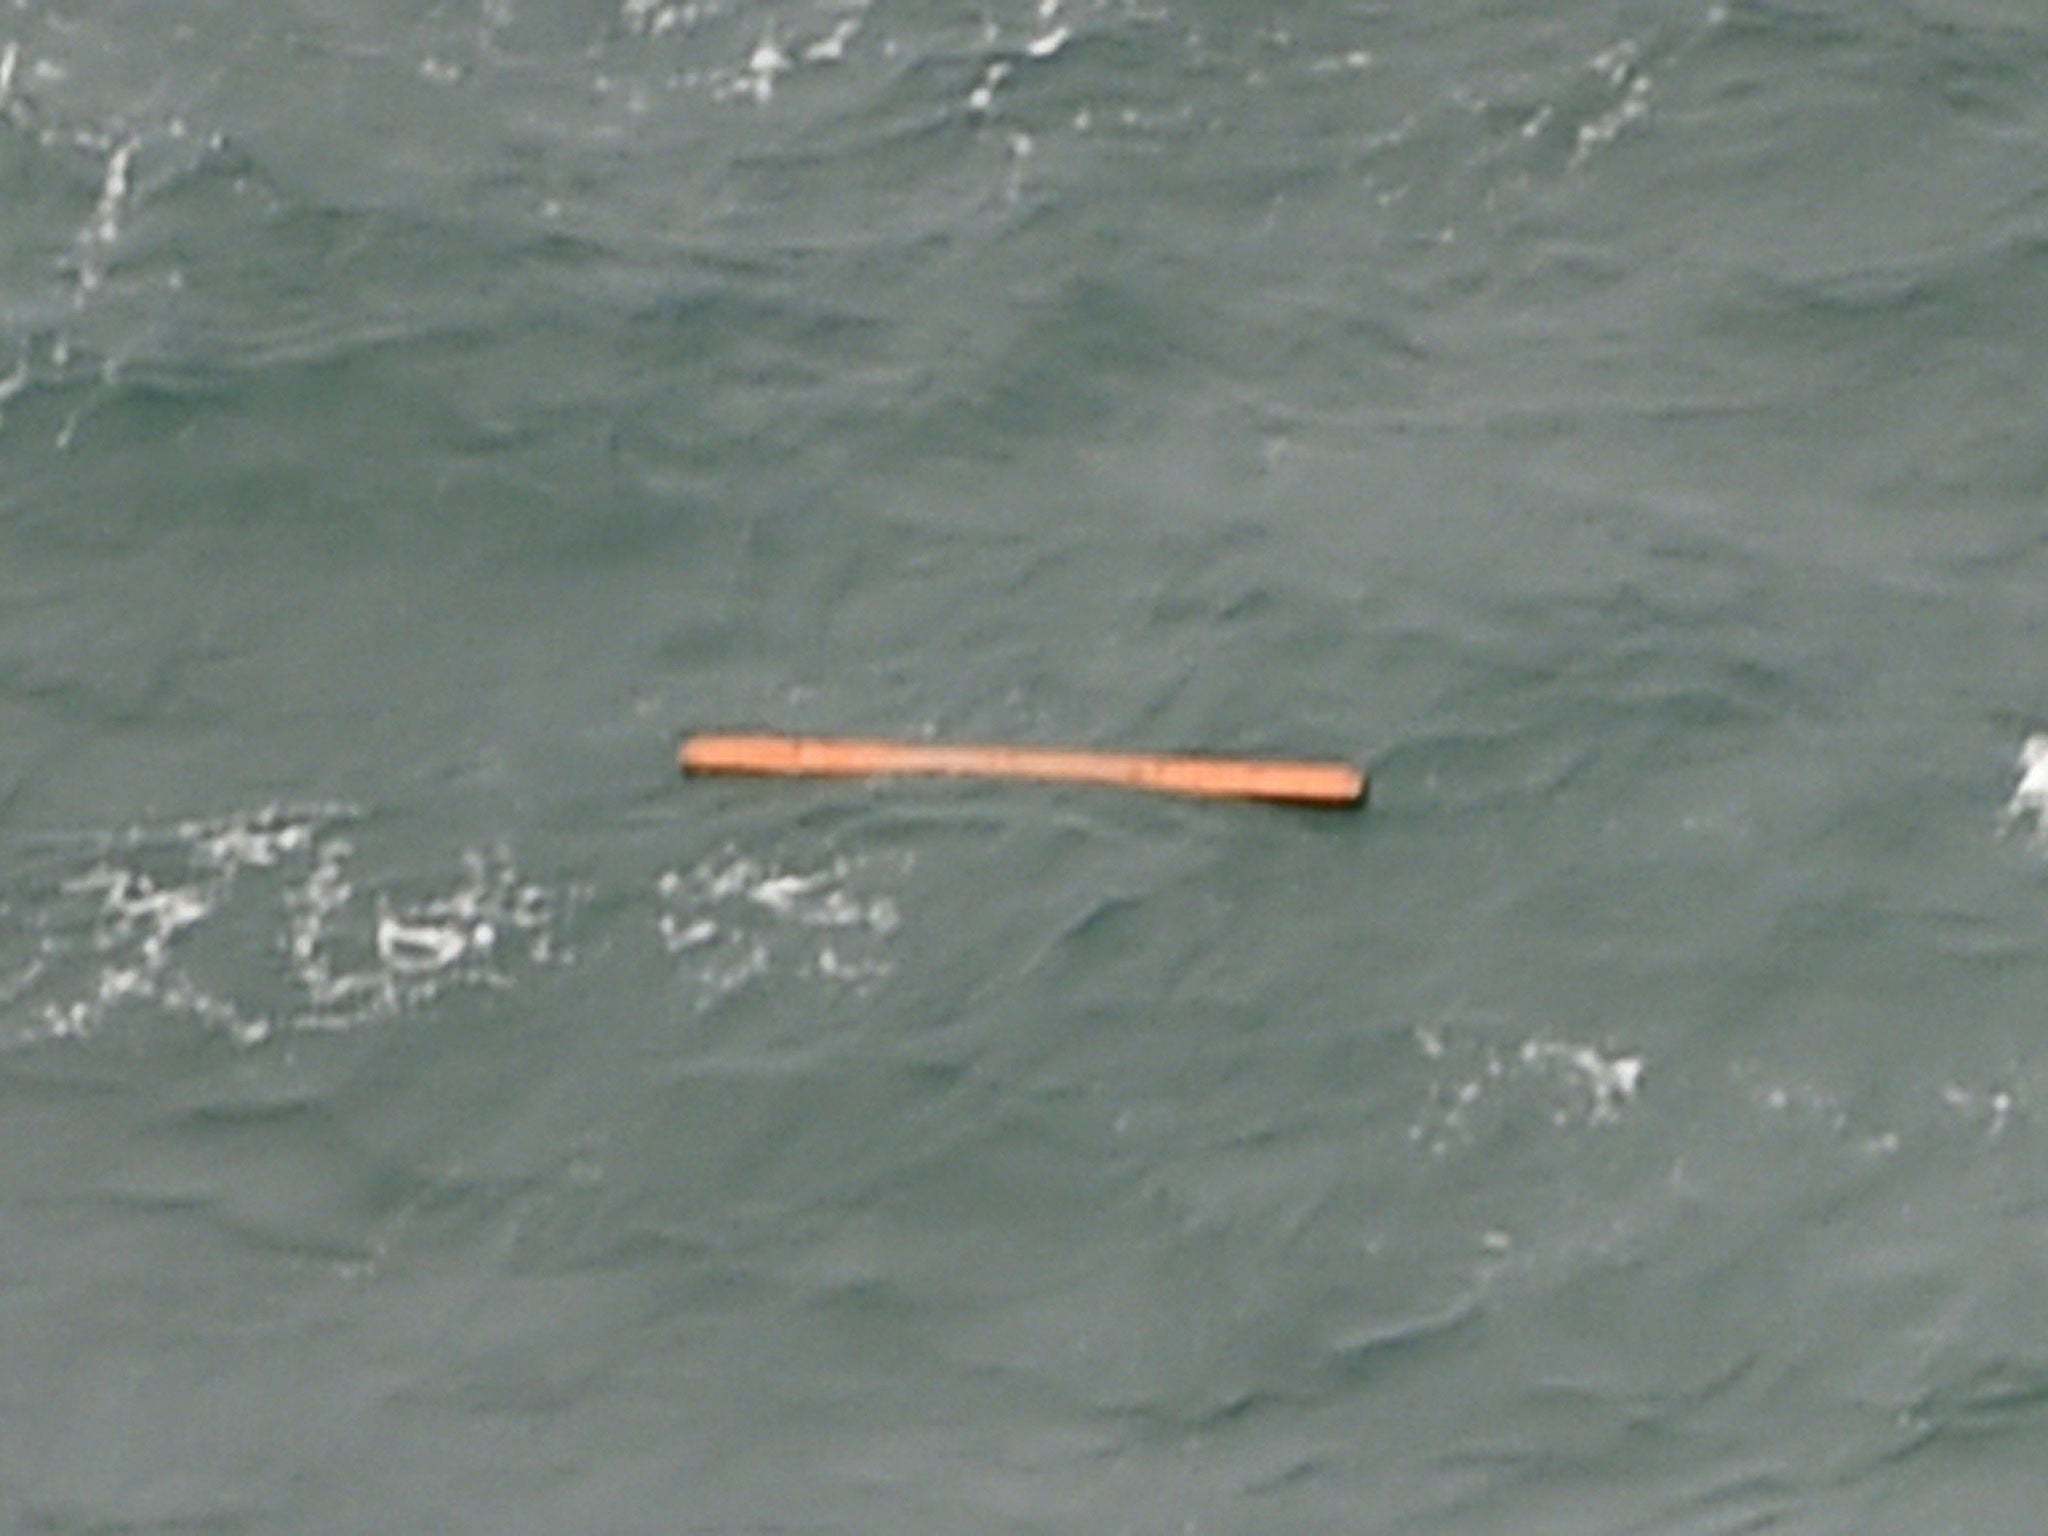 Floating debris spotted by an Indonesia search and rescue aircraft in the hunt for the missing AirAsia flight QZ8501